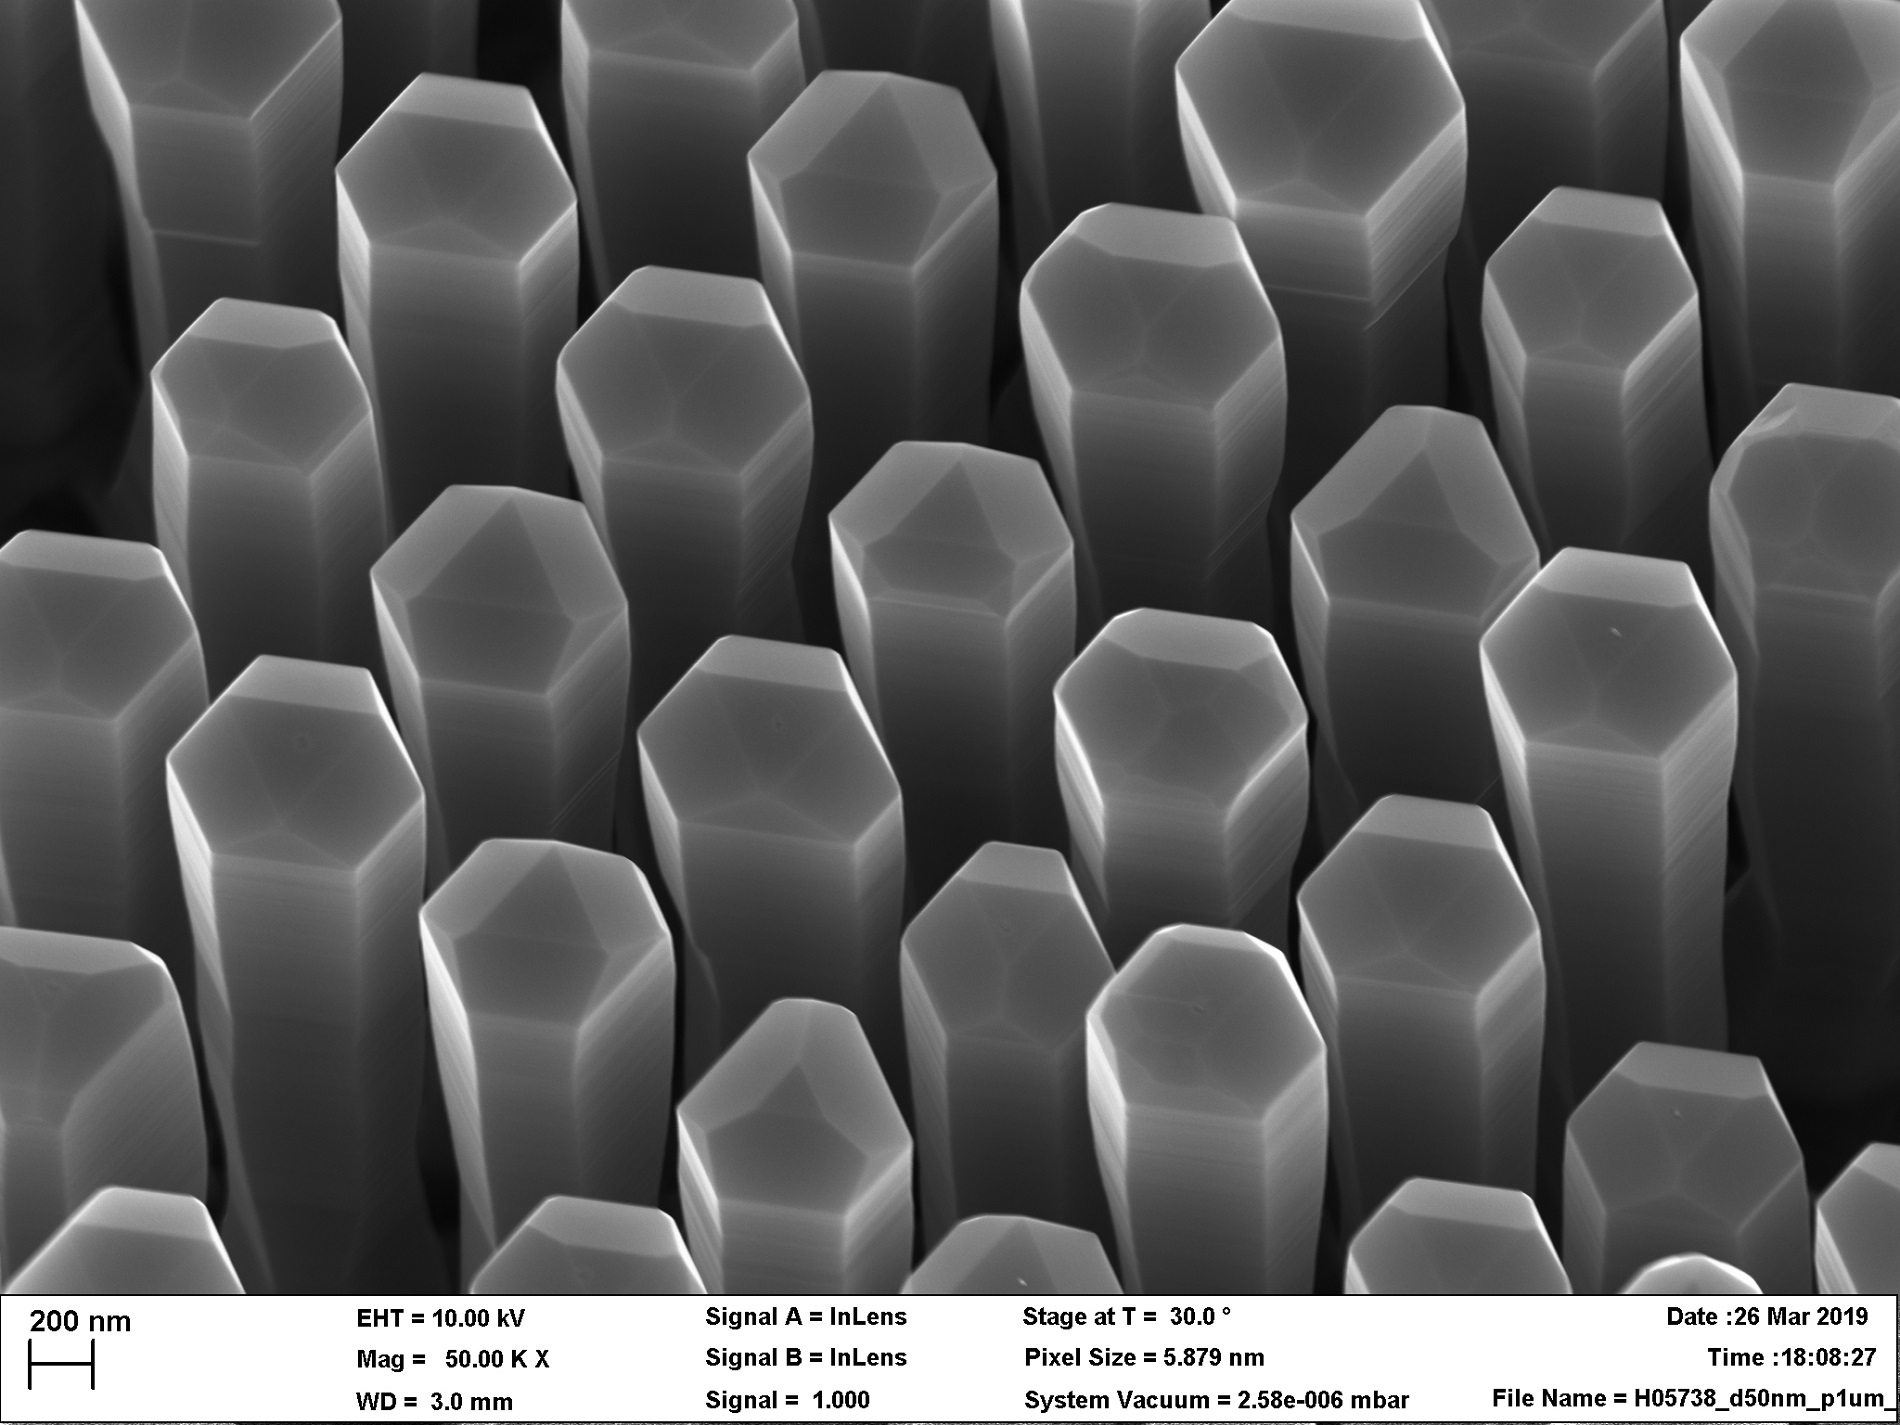 Nanowires made of germanium-silicon alloy with hexagonal crystal lattice can generate light